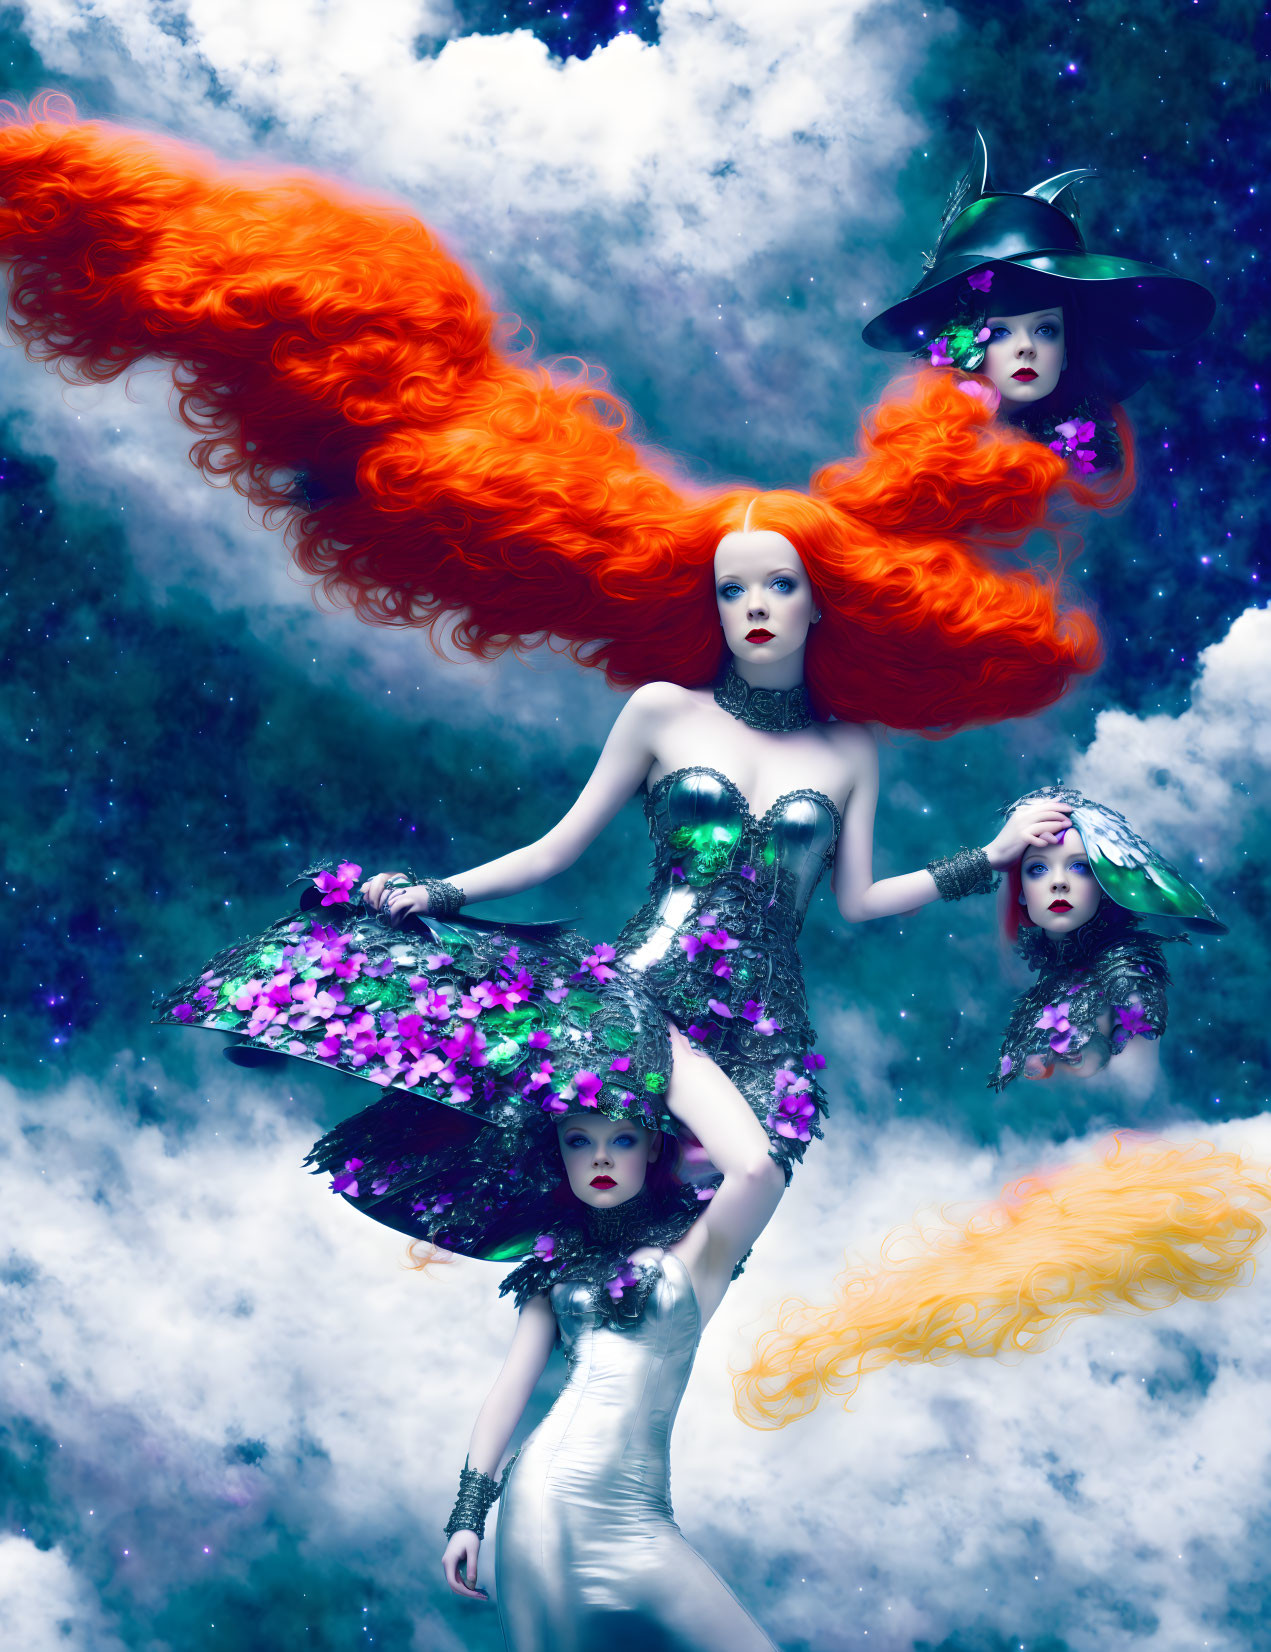 Vibrant red hair models in whimsical outfits against cosmic backdrop